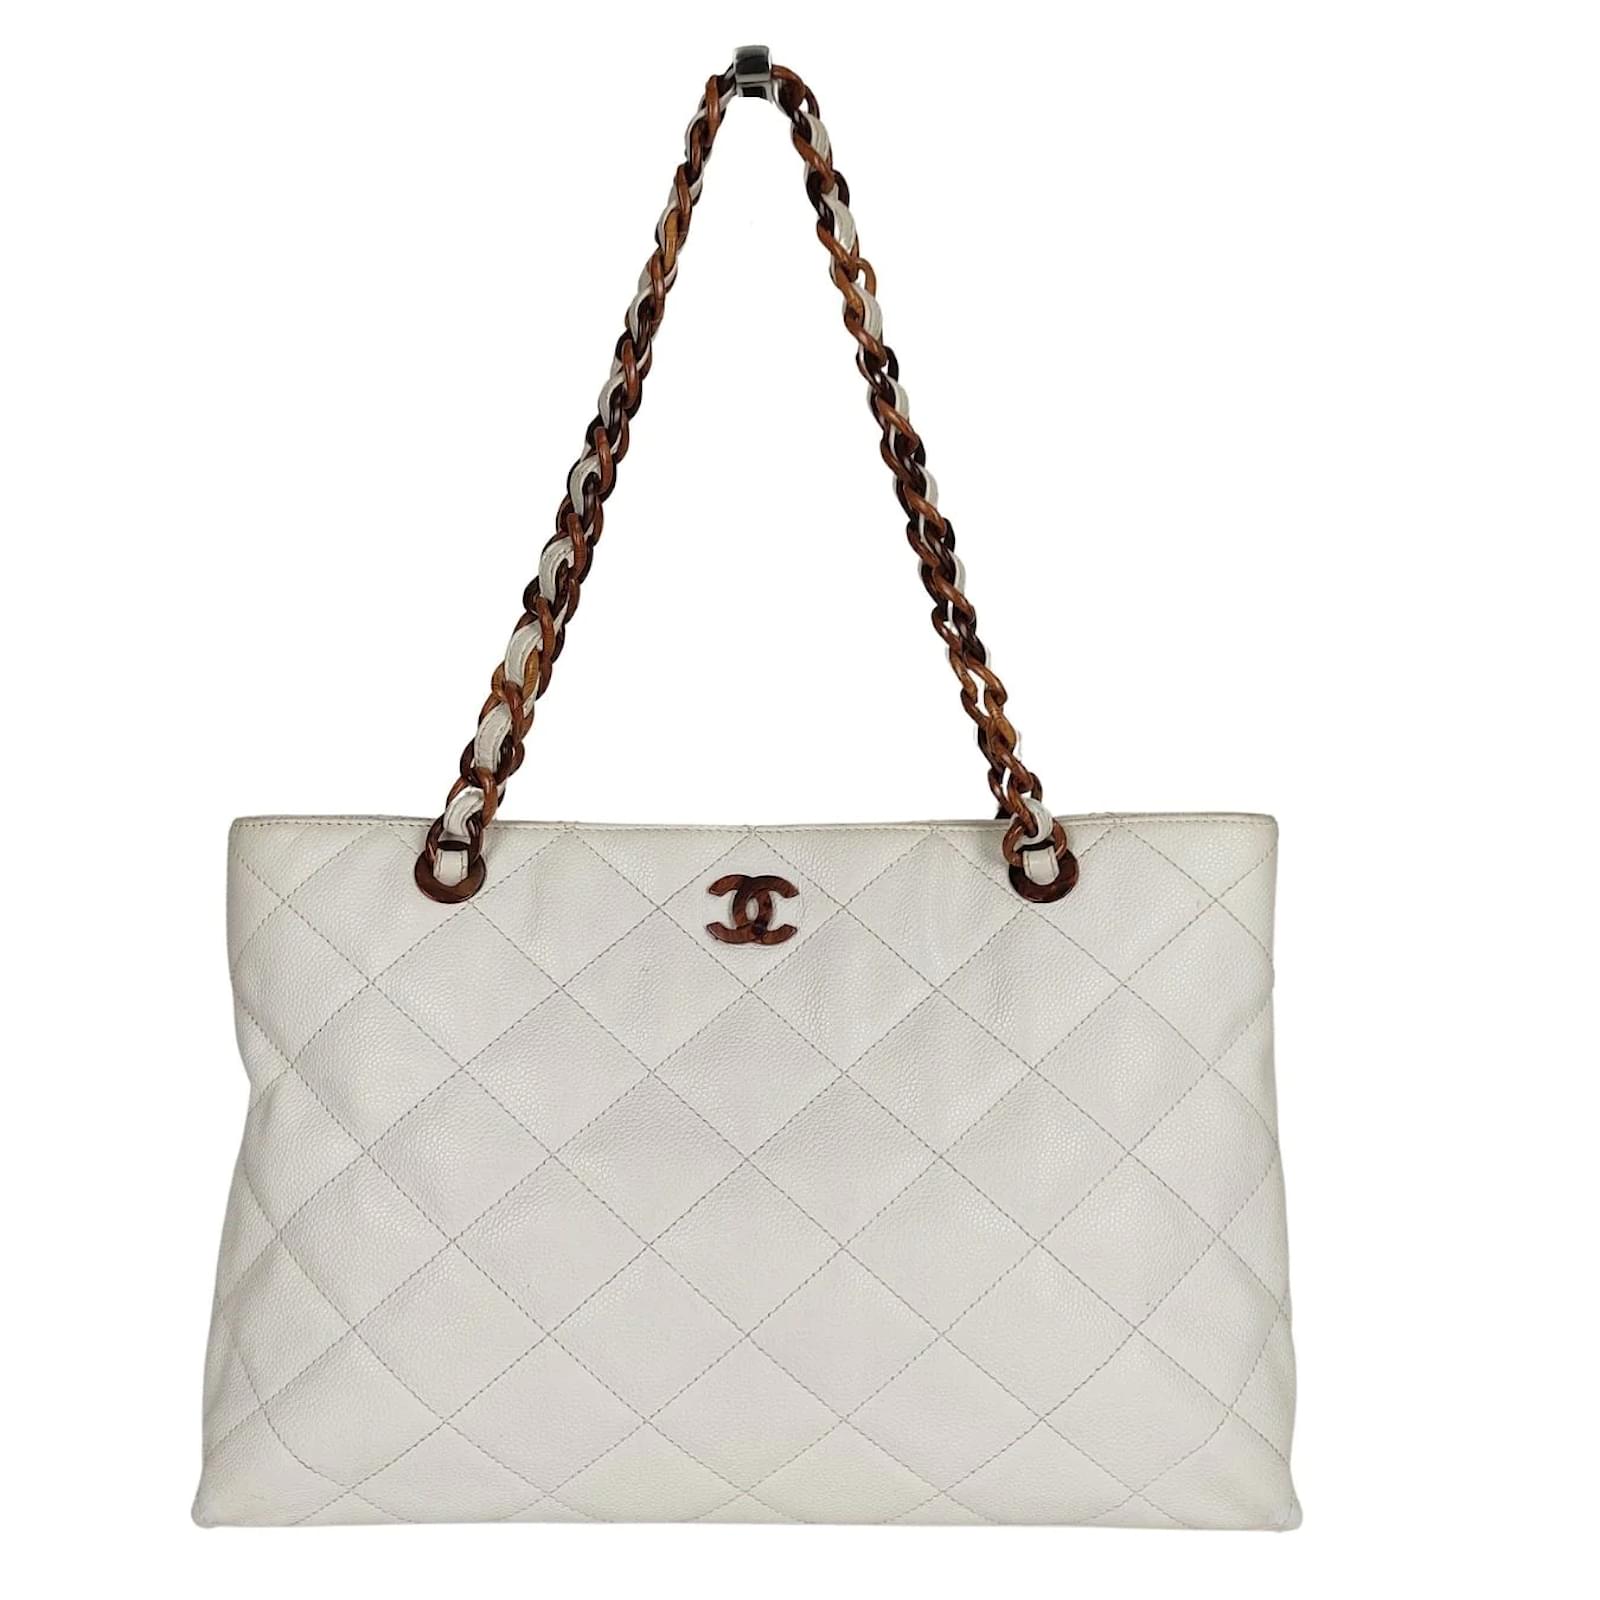 Chanel Chanel Shoulder Bag Shopping Tote in white Caviar leather